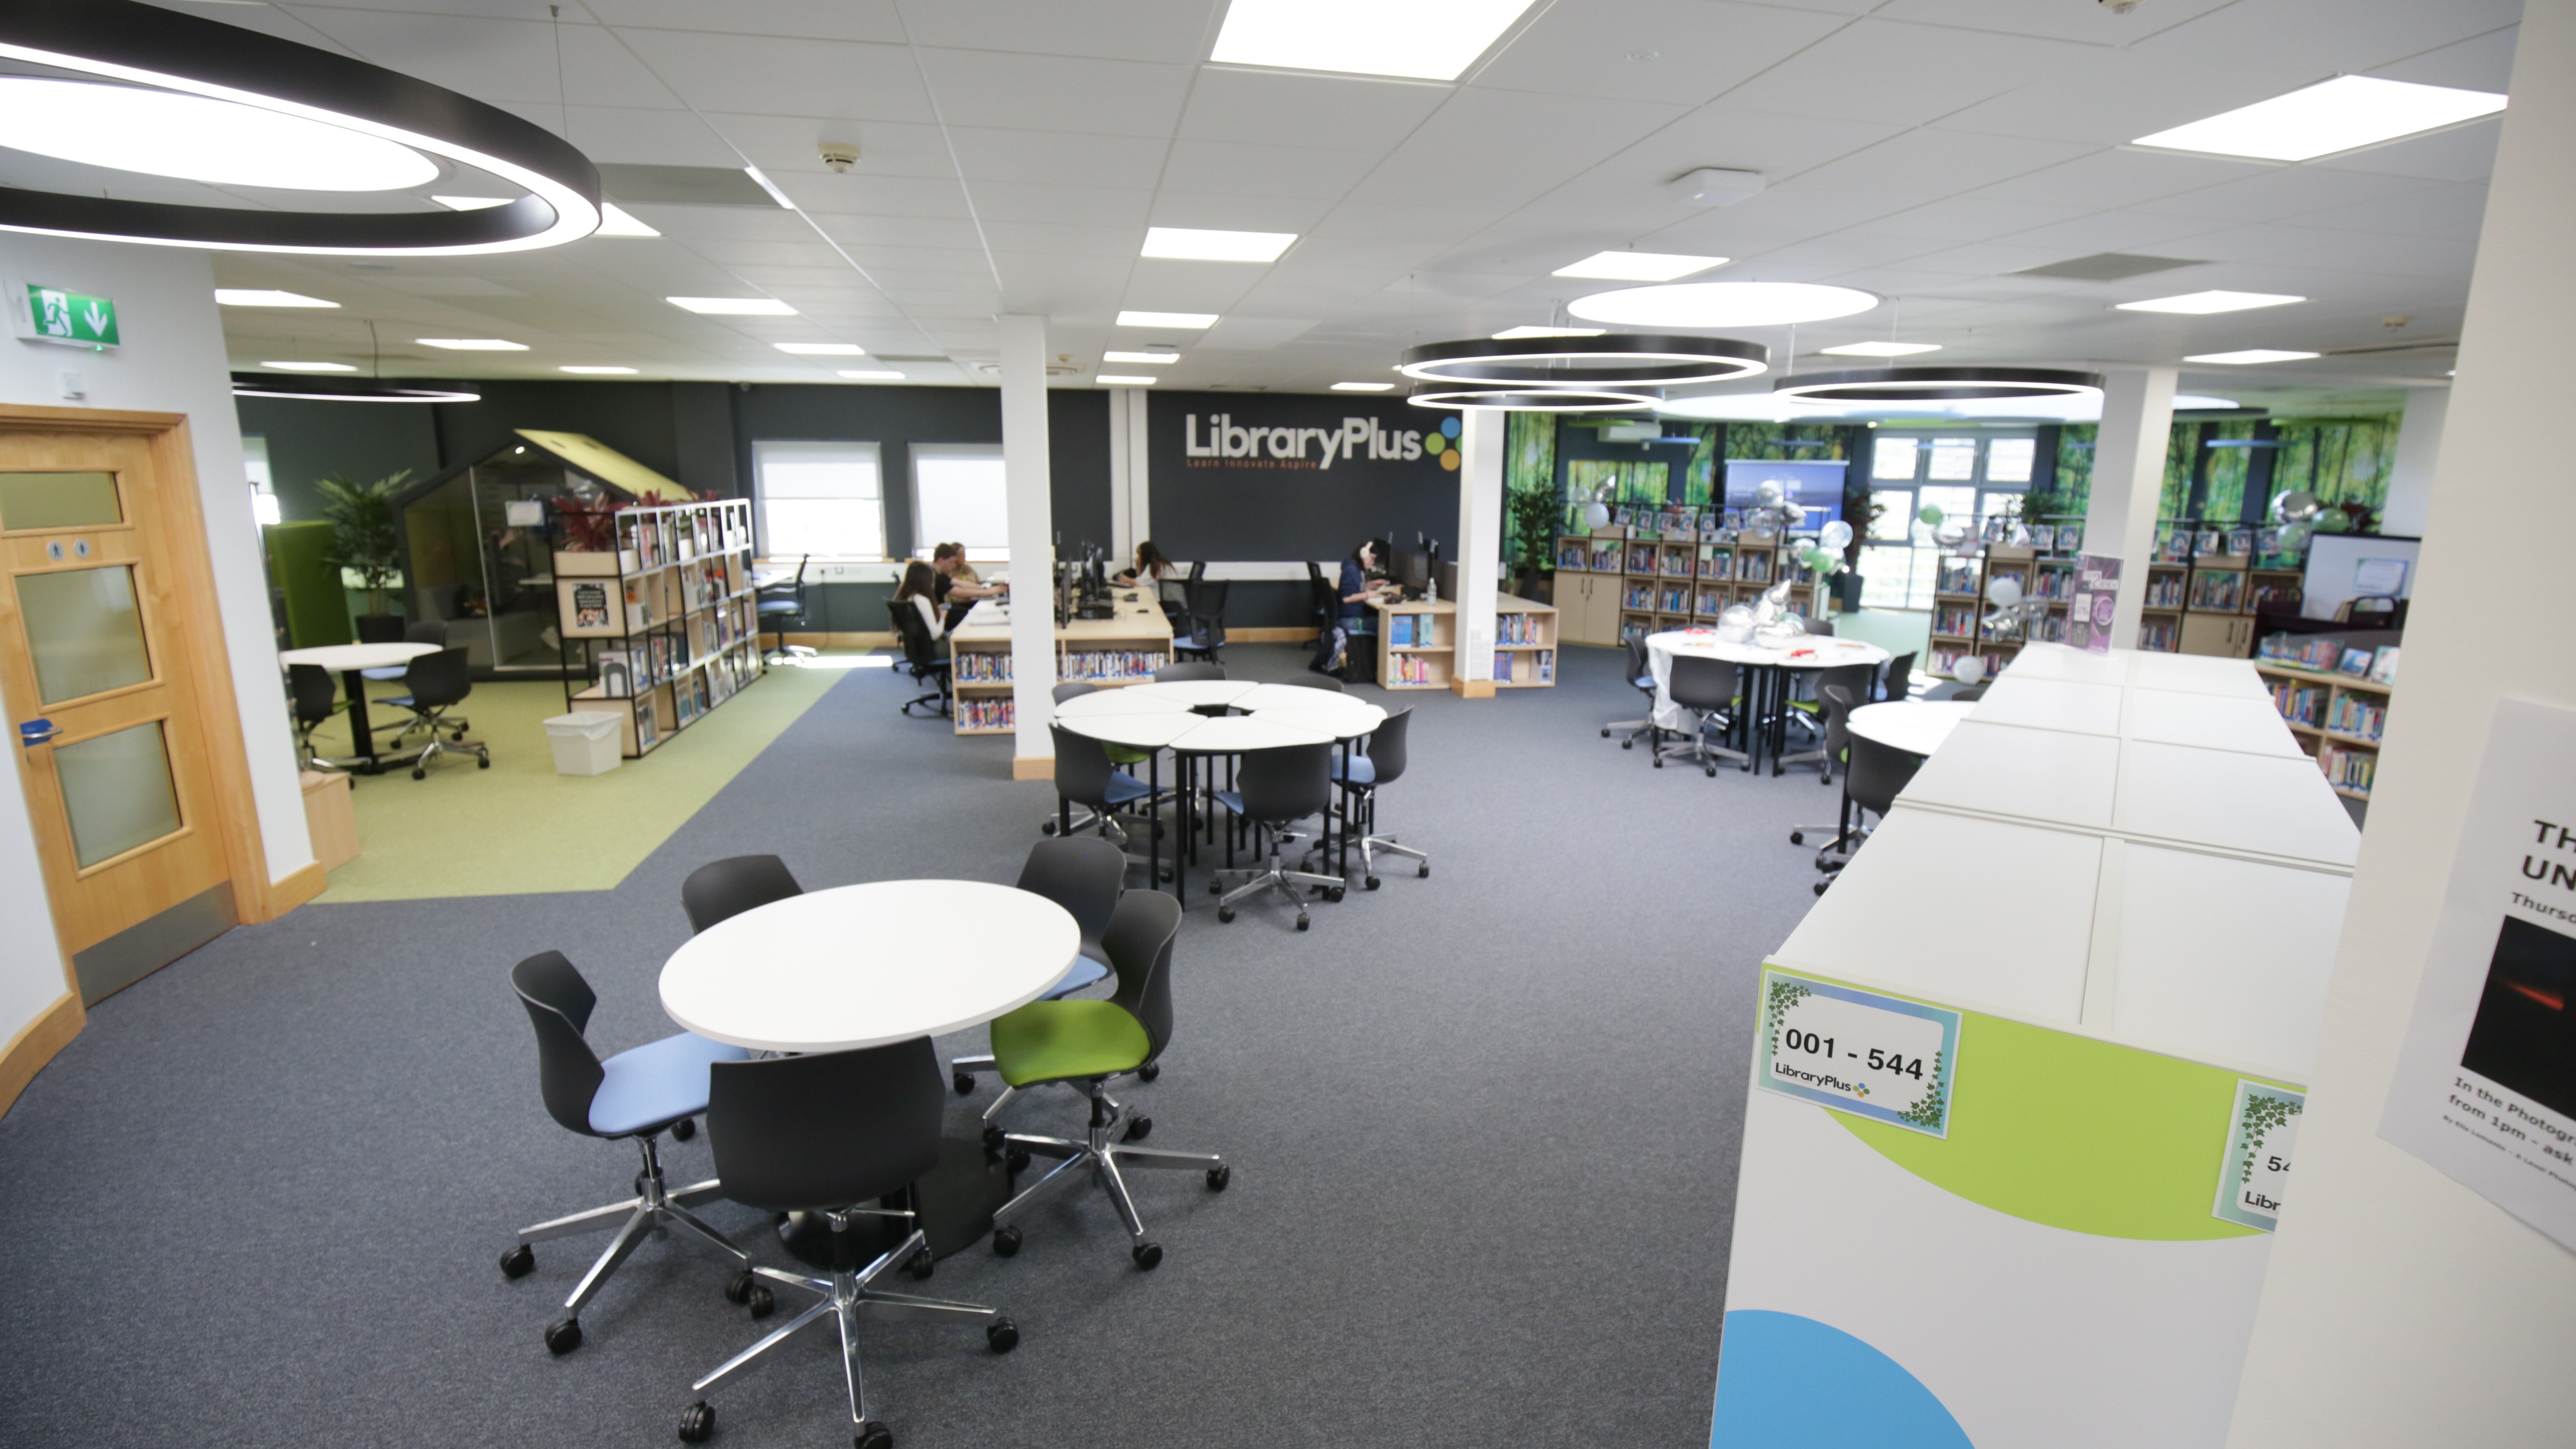 Overview shot of Loxton Library refurbishment